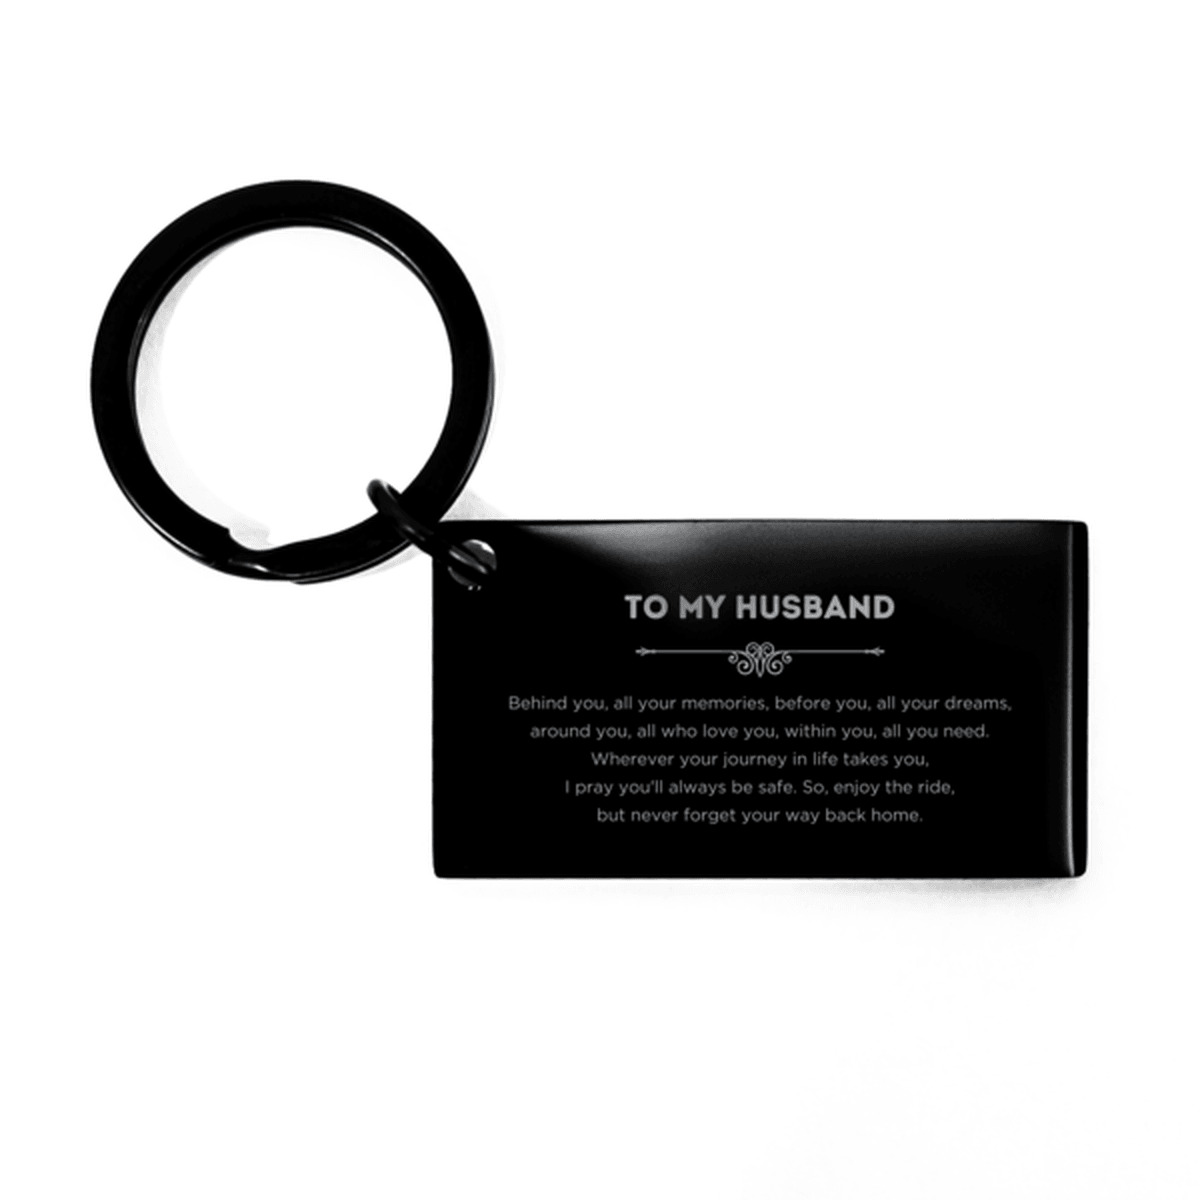 Husband Keychain Bracelet Birthday Christmas Unique Gifts Behind you, all your memories, before you, all your dreams - Mallard Moon Gift Shop